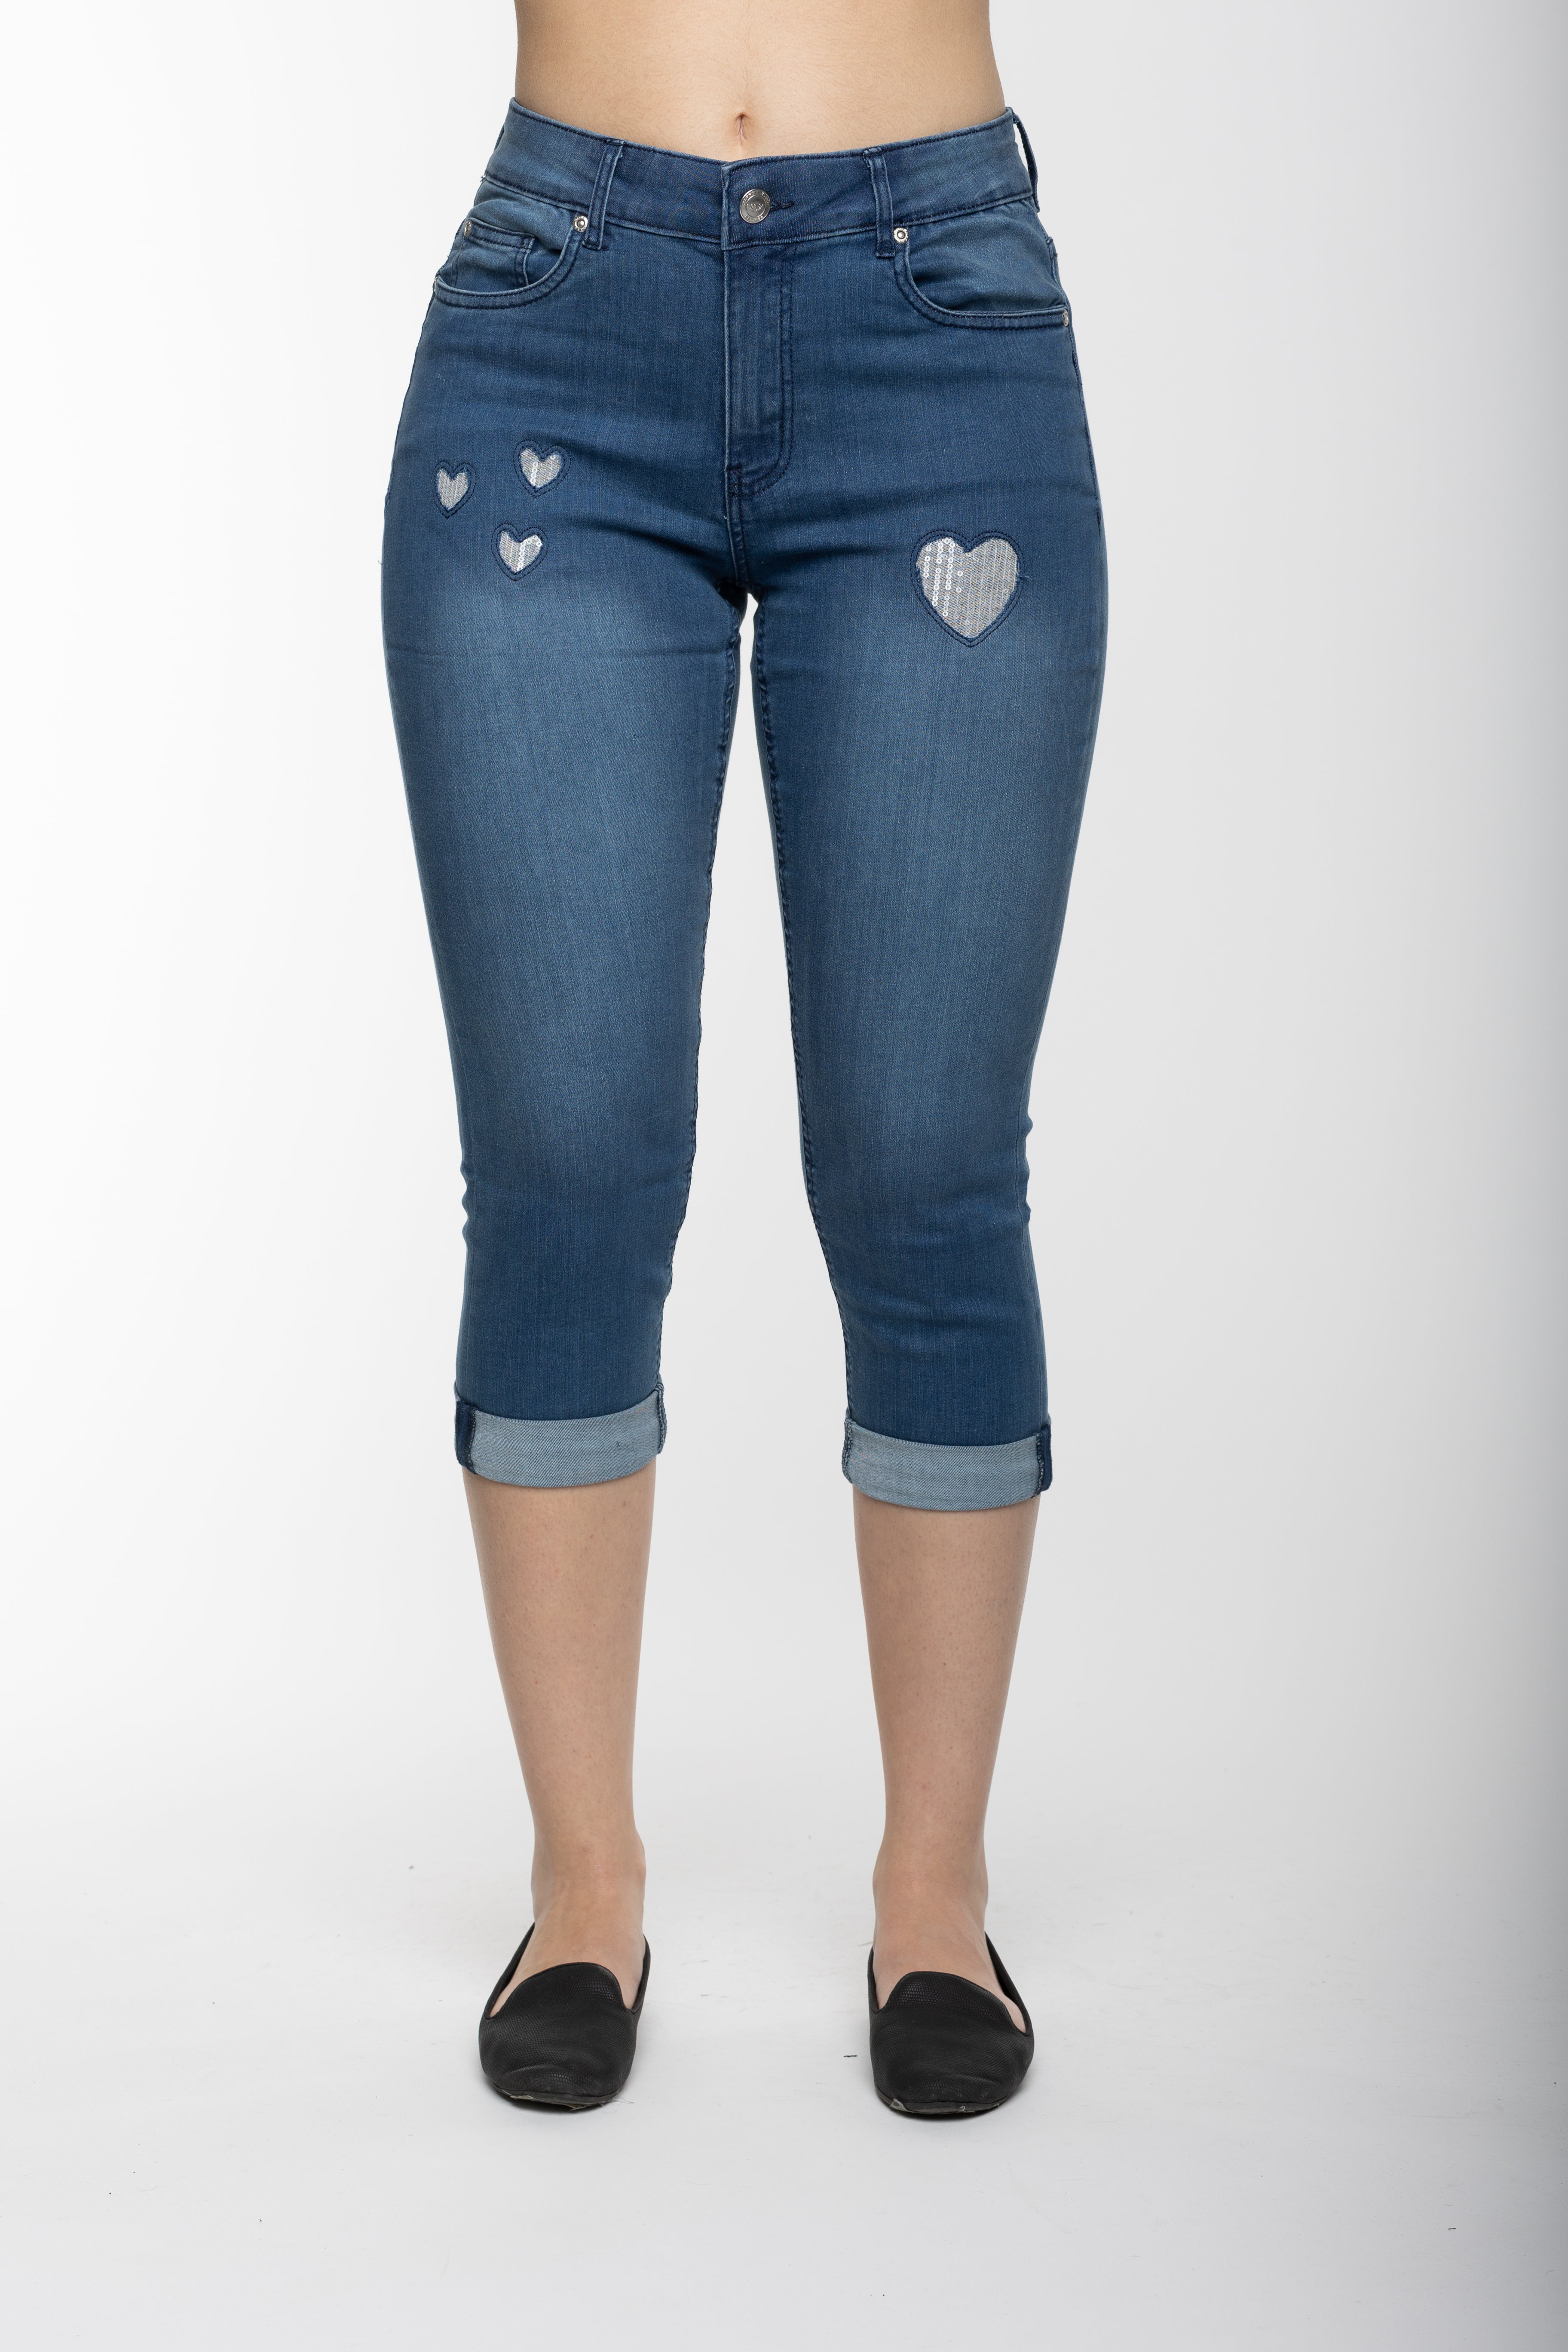 Buy Wholesale Girls Blue Embroidered Jeans Capri - Jeans for Girls